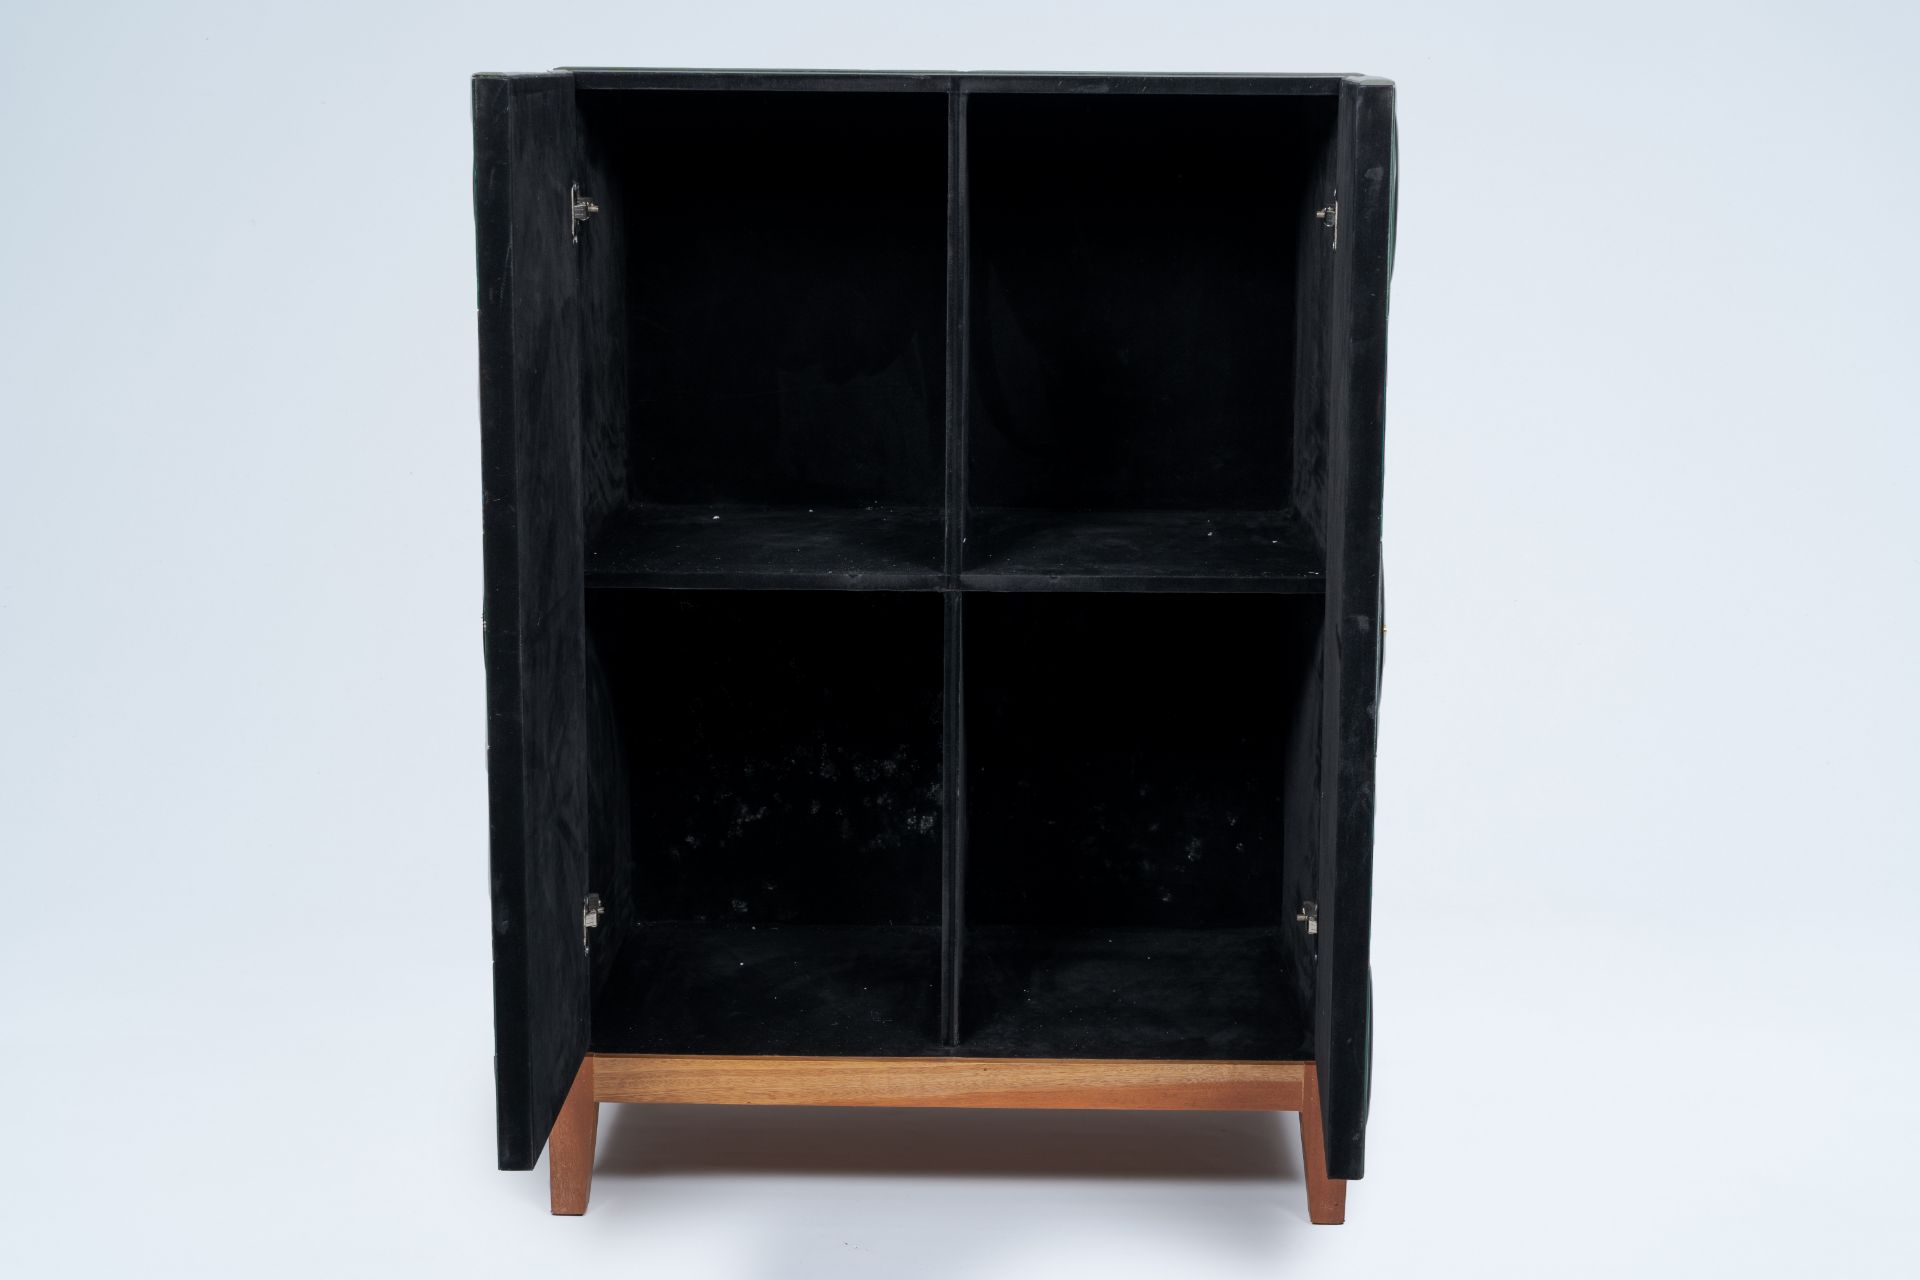 Olivier De Schrijver (1958): A 'Special Olivier' two-door cabinet with antique glass and lined with - Image 7 of 7